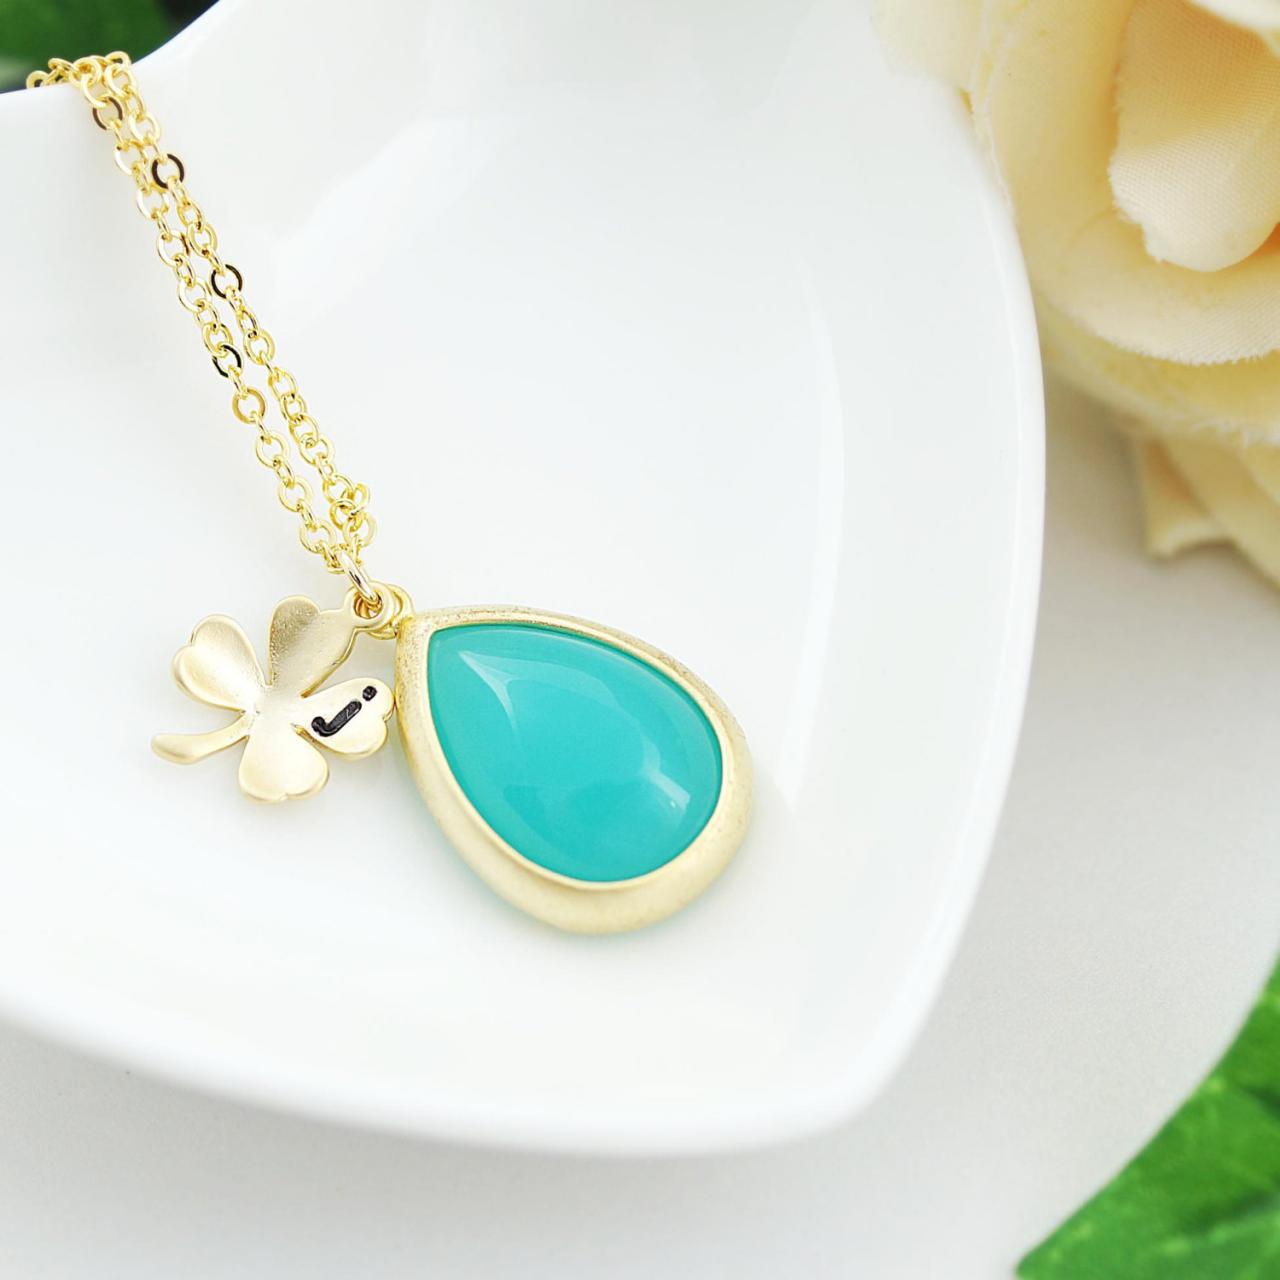 Initial Necklace Personalized Necklace, Four Leaf Clover With Mint Opal Glass Necklace, Wedding Bridesmaids Gift For Her, Bridesmaid Jewelry